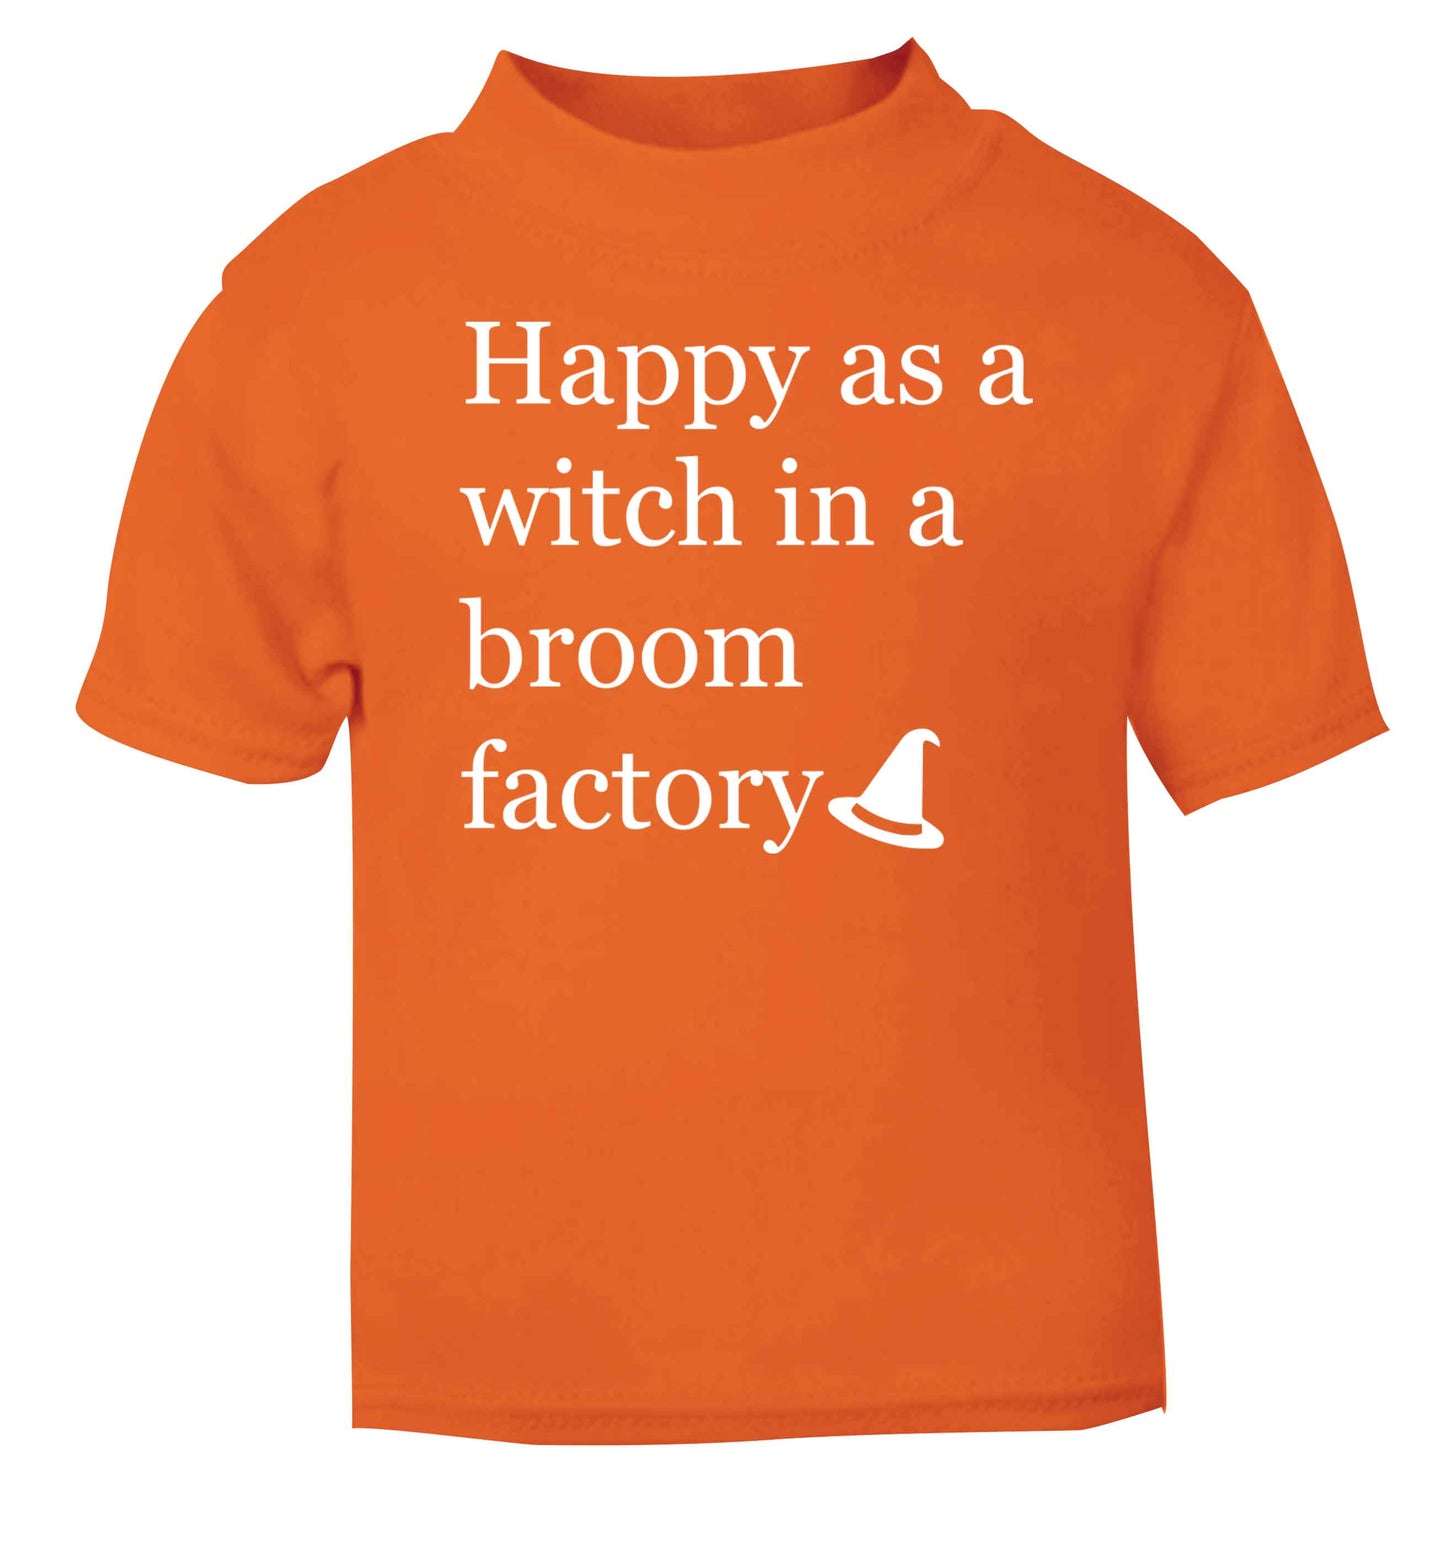 Happy as a witch in a broom factory orange baby toddler Tshirt 2 Years